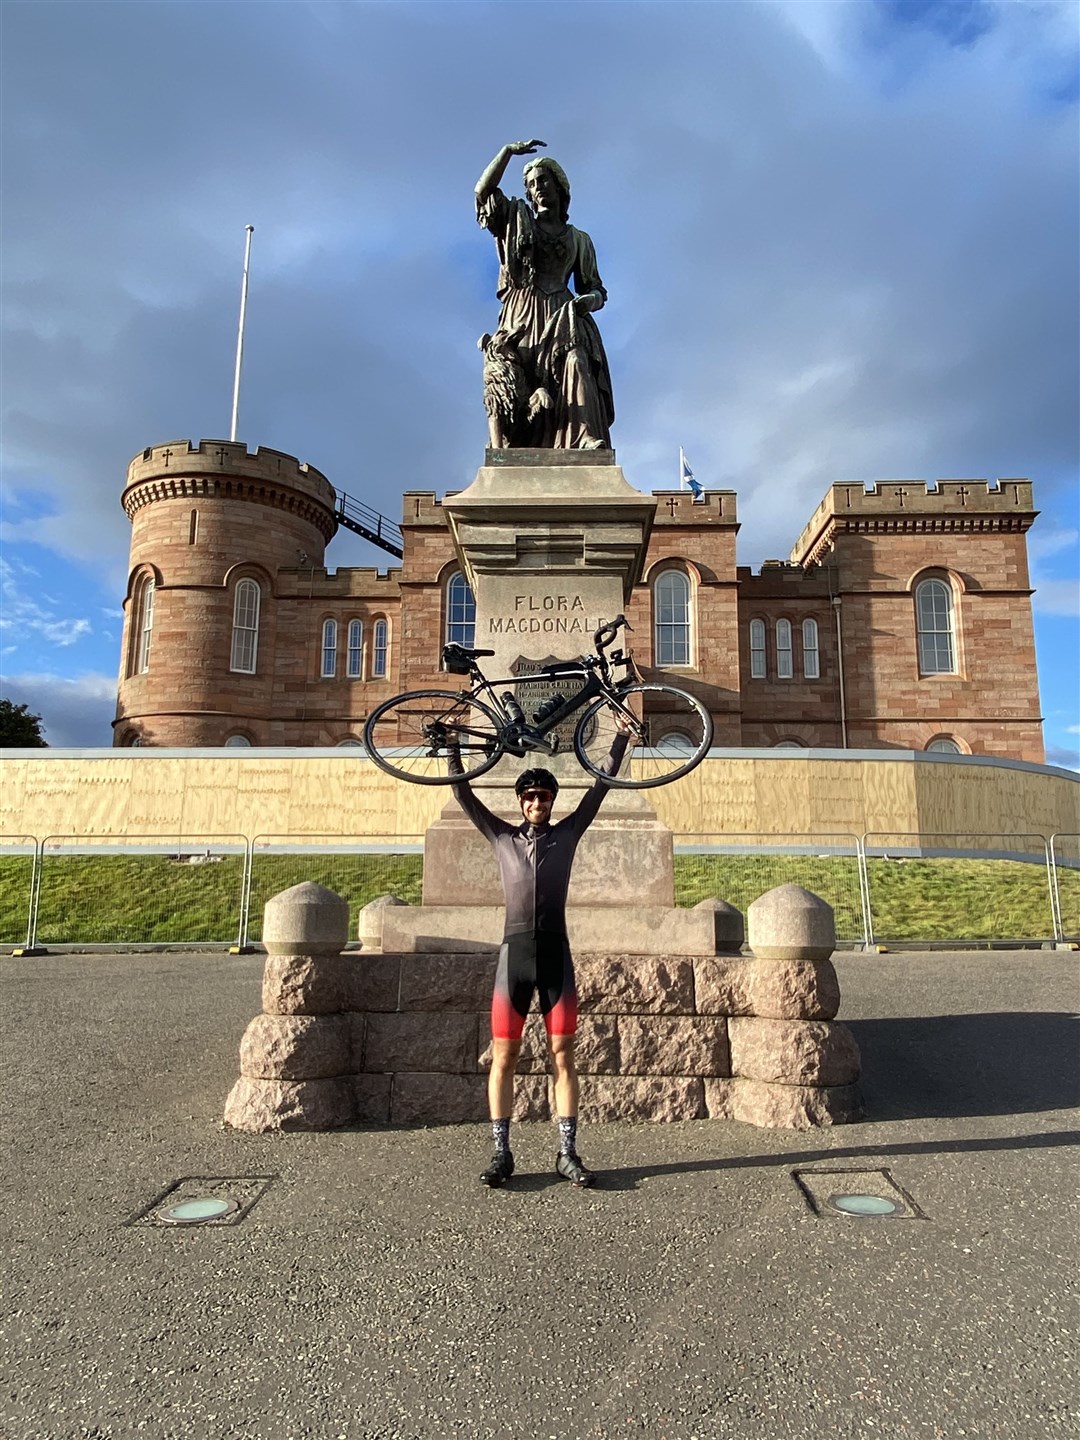 A bike lift in celebration at the finish line at Inverness Castle.